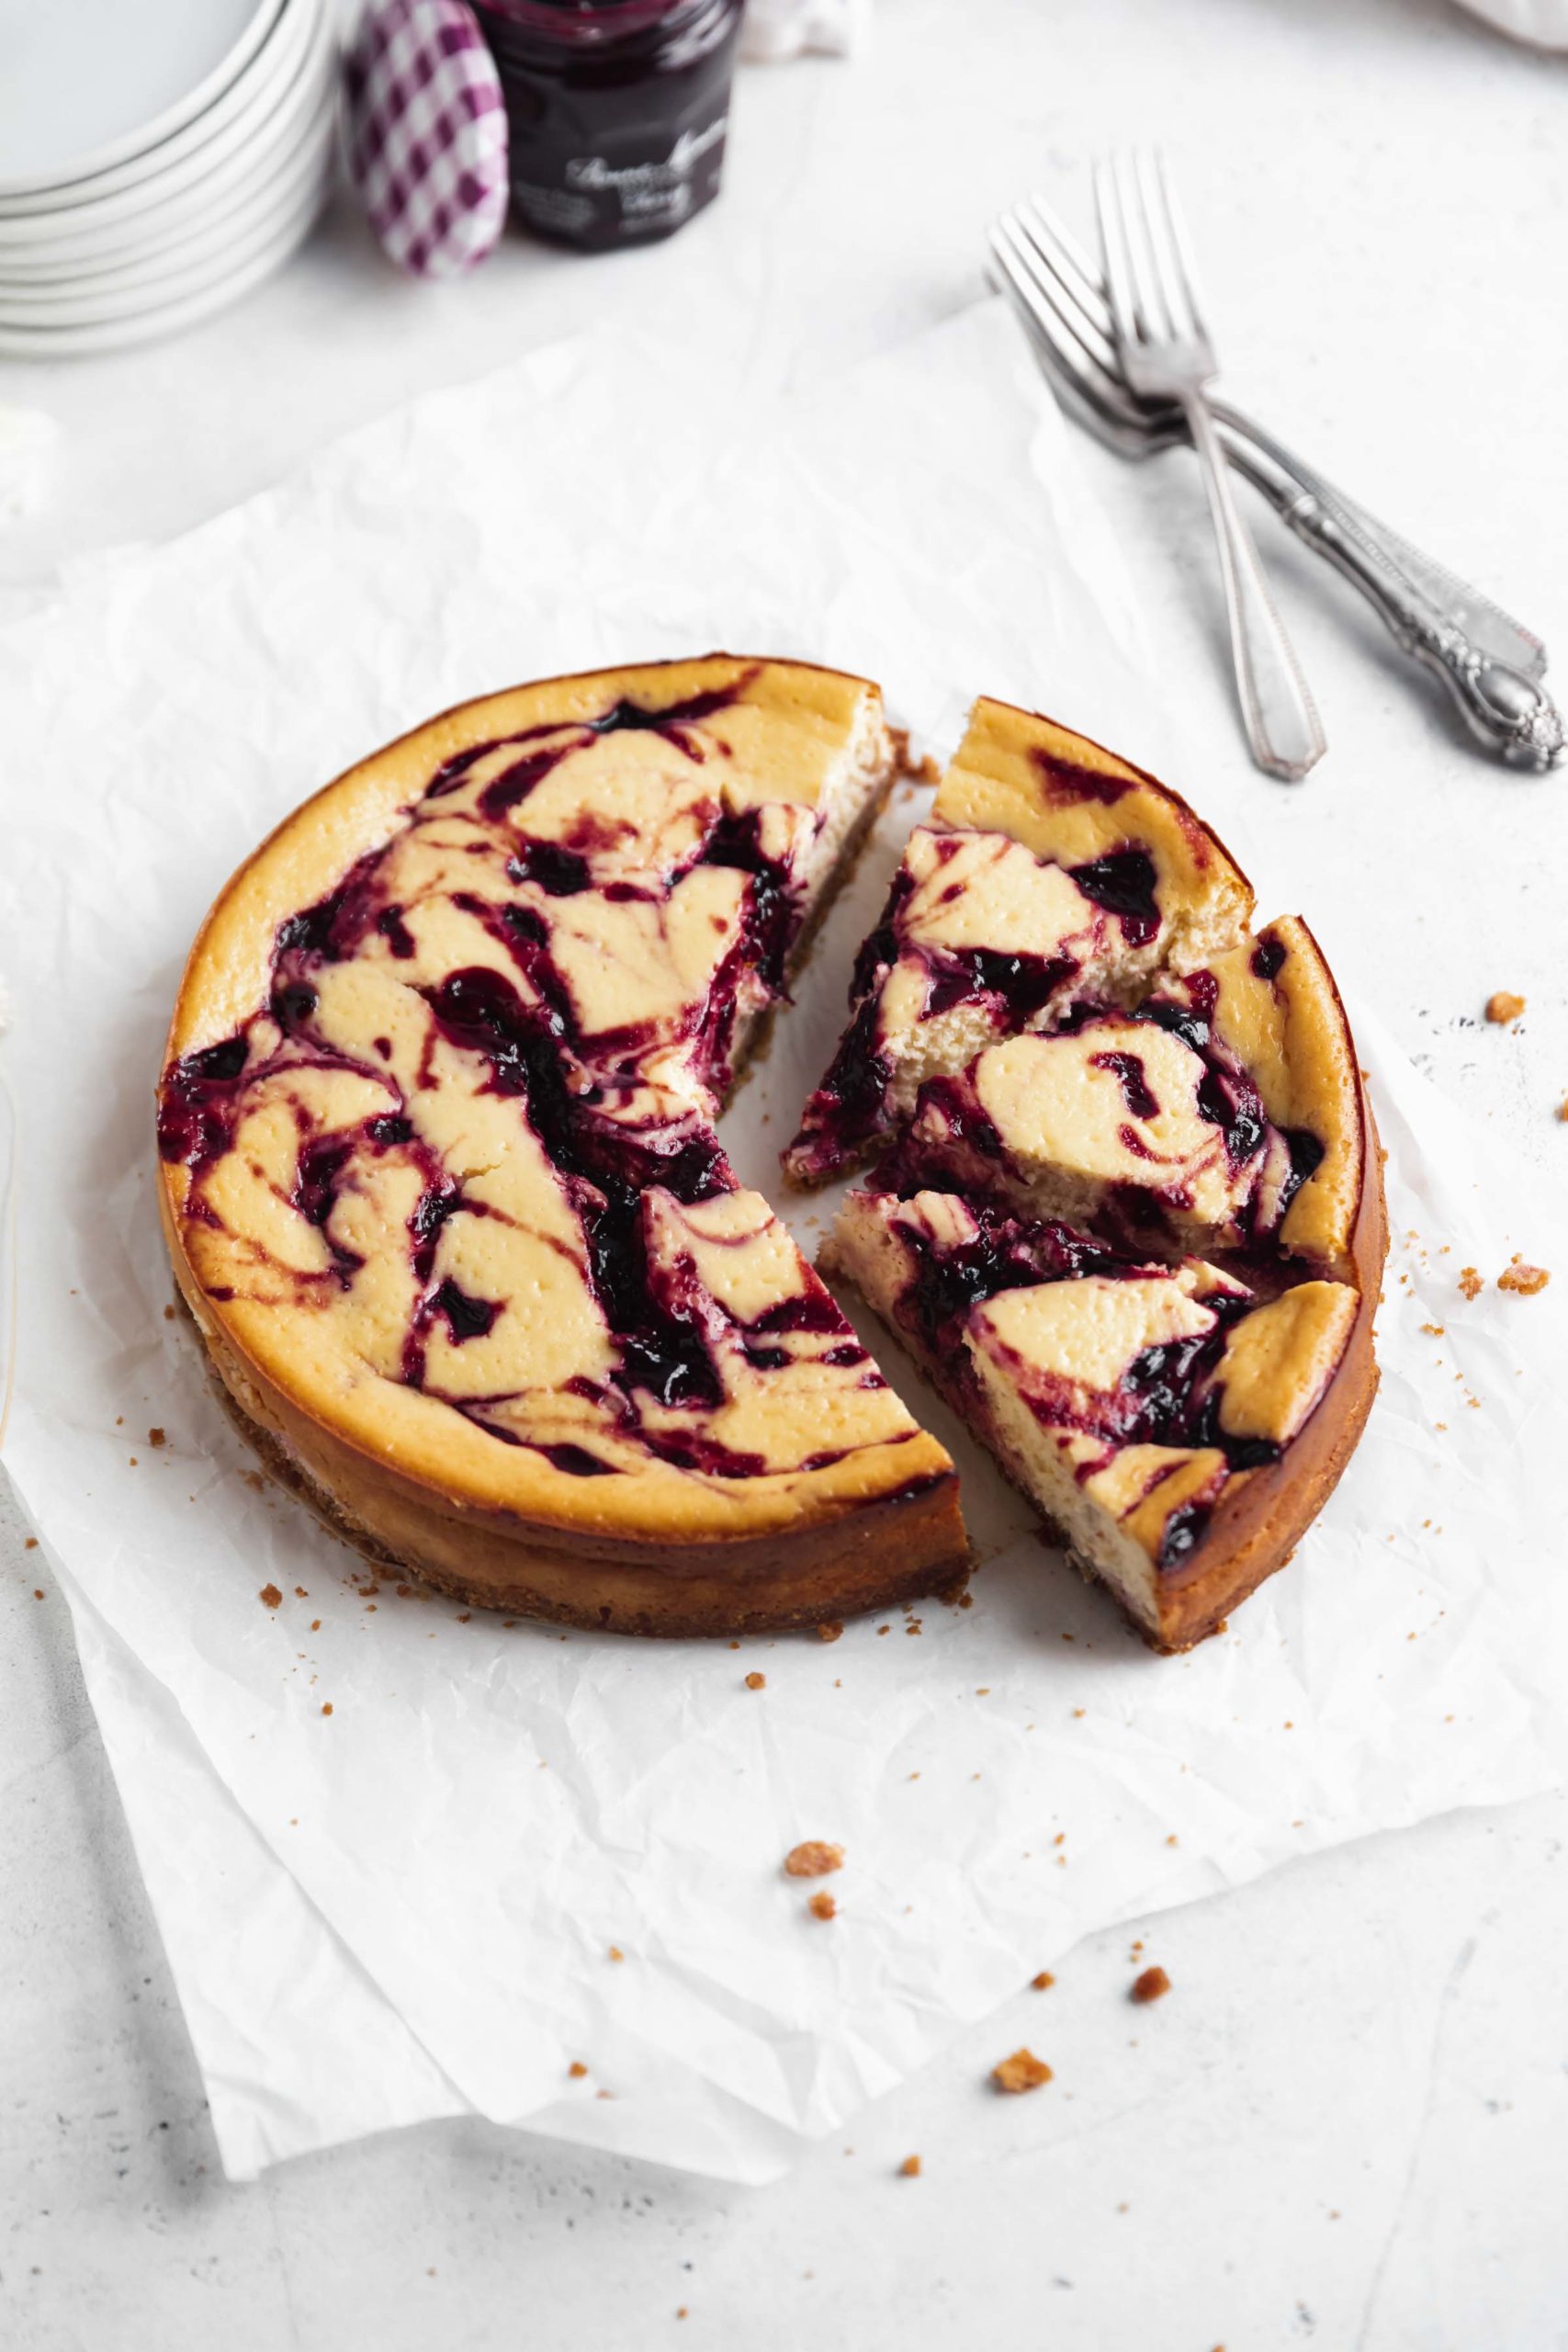 healthy cherry cheesecake with slices taken out